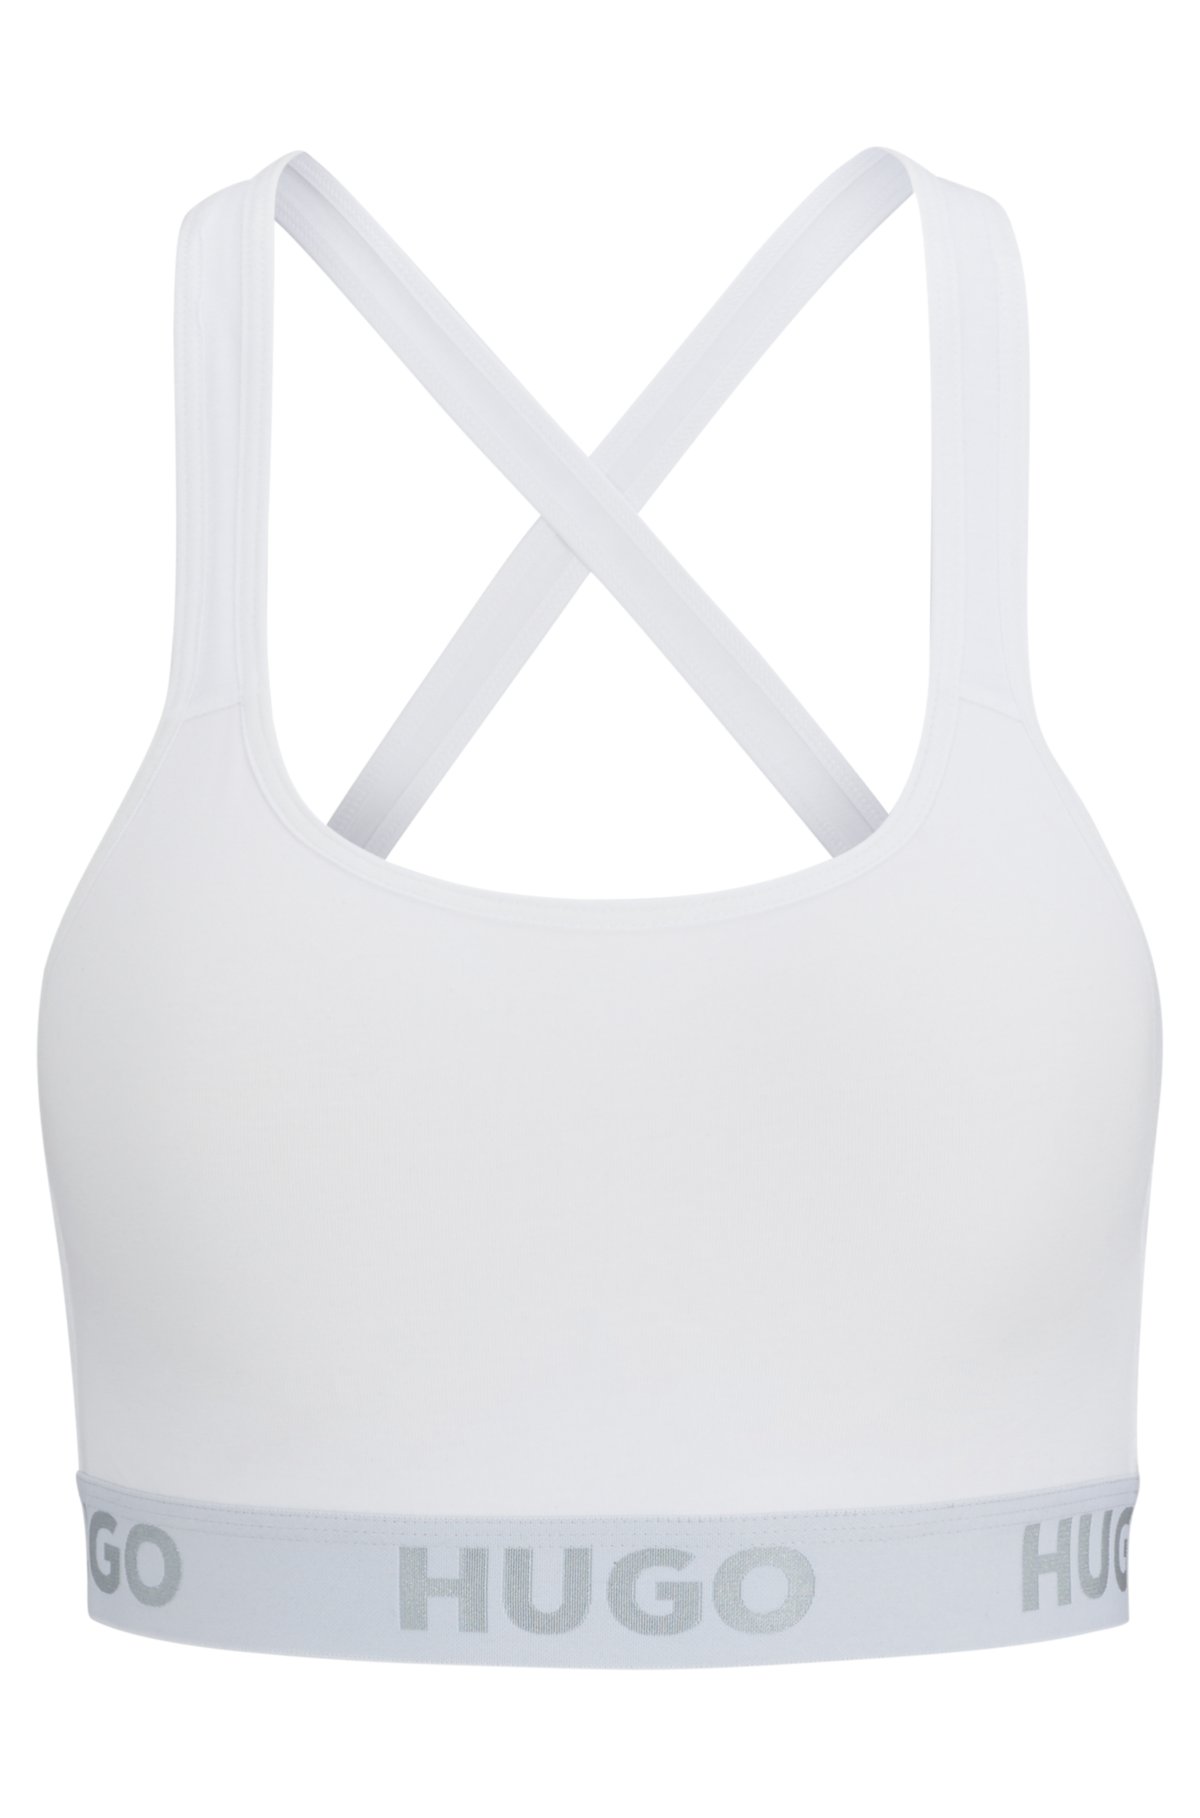 - in with Sports repeat stretch cotton bra HUGO logos